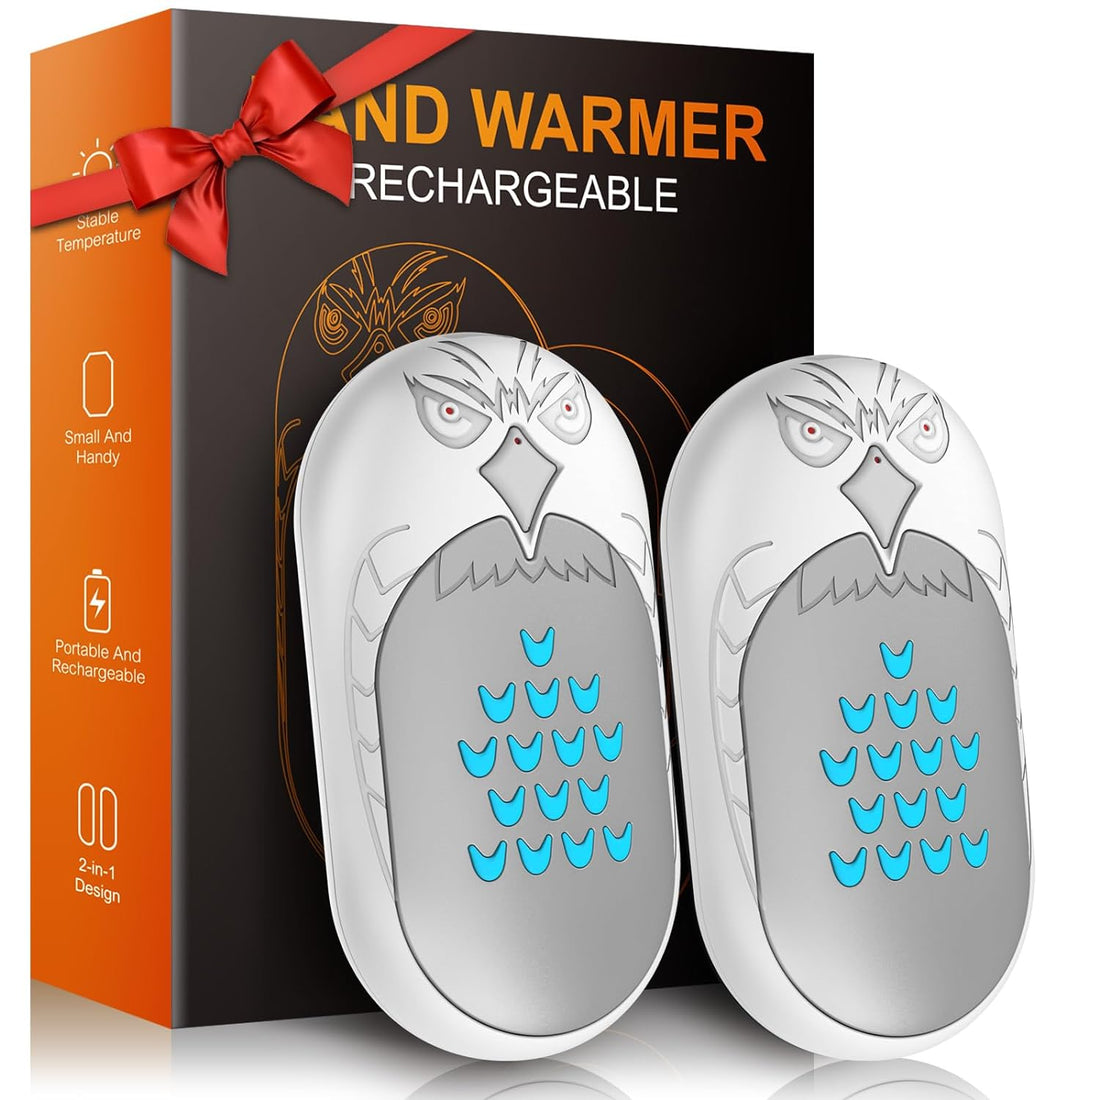 WOWGO Hand Warmers Rechargeable, 2 Pack Electric Hand Warmer 6000mAh Reusable Handwarmers with 20Hrs Long Heating, Portable Pocket Heater, Gift for Christmas, Camping, Golf, Hunting (White)